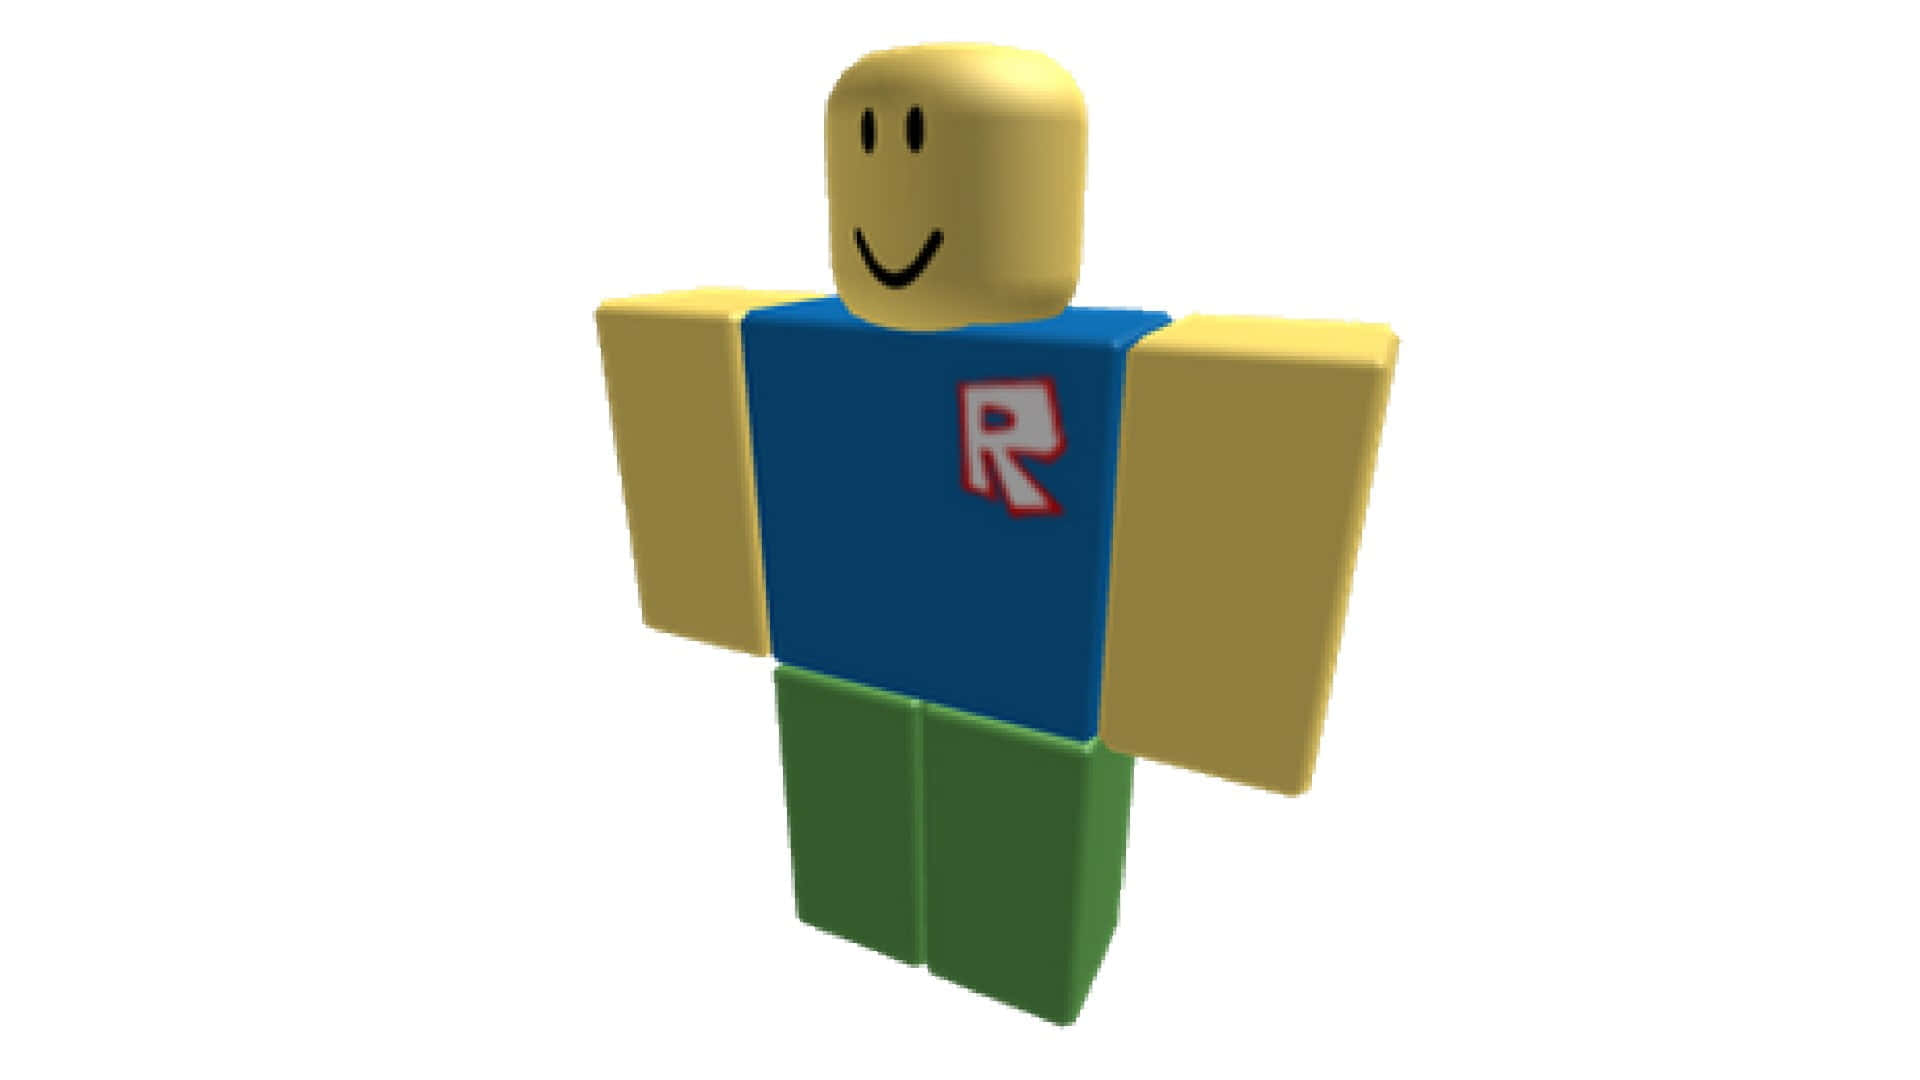 Download Get ready to plat and create with cutr noobs on Roblox Wallpaper